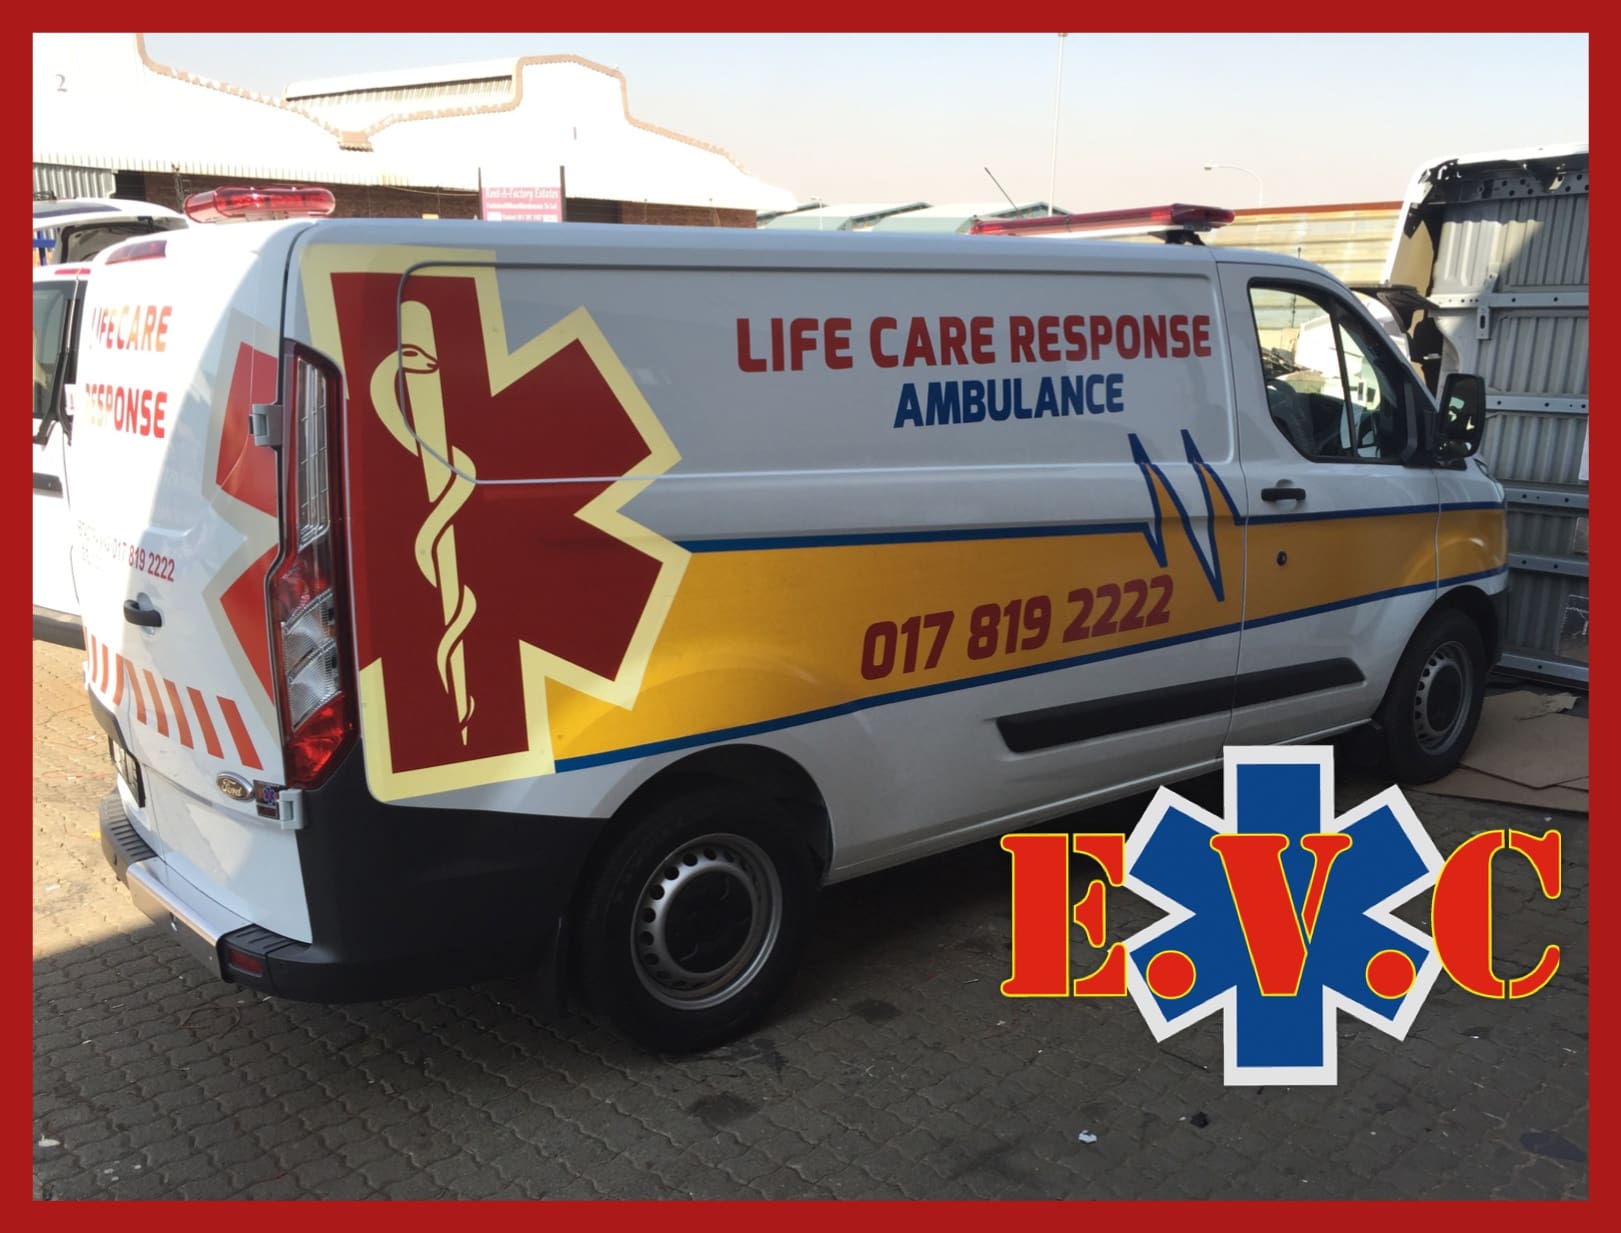 New Ambulance for Life Care Response